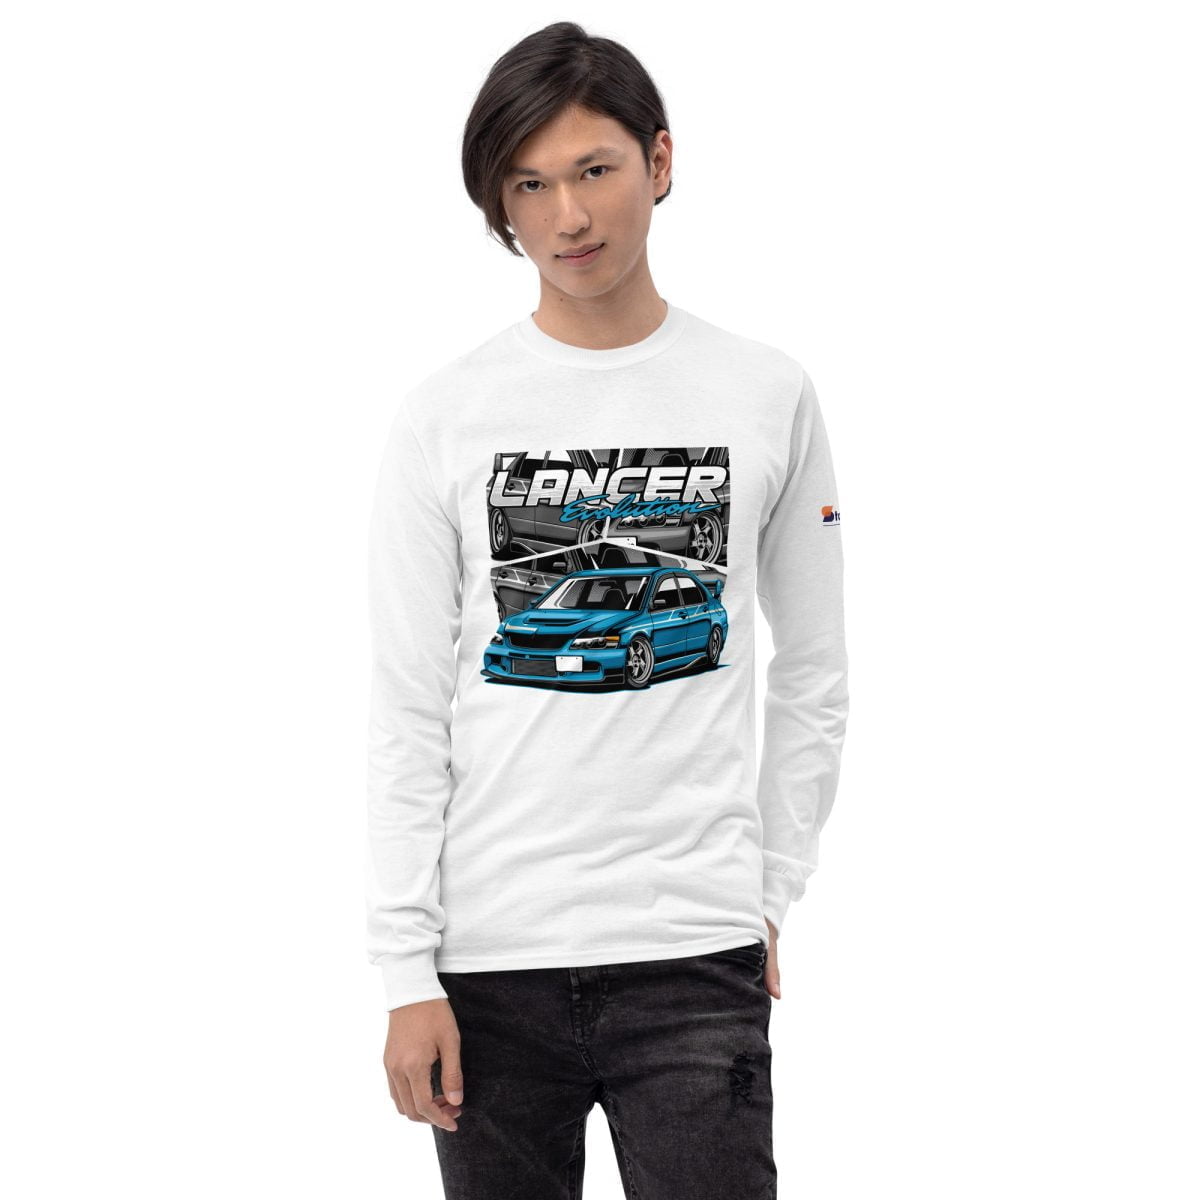 A man wearing a Mitsubishi Lancer Evo 10 mens long sleeve shirt with a blue car on it featuring the Mitsubishi Lancer Evo 10 design | StancedLife